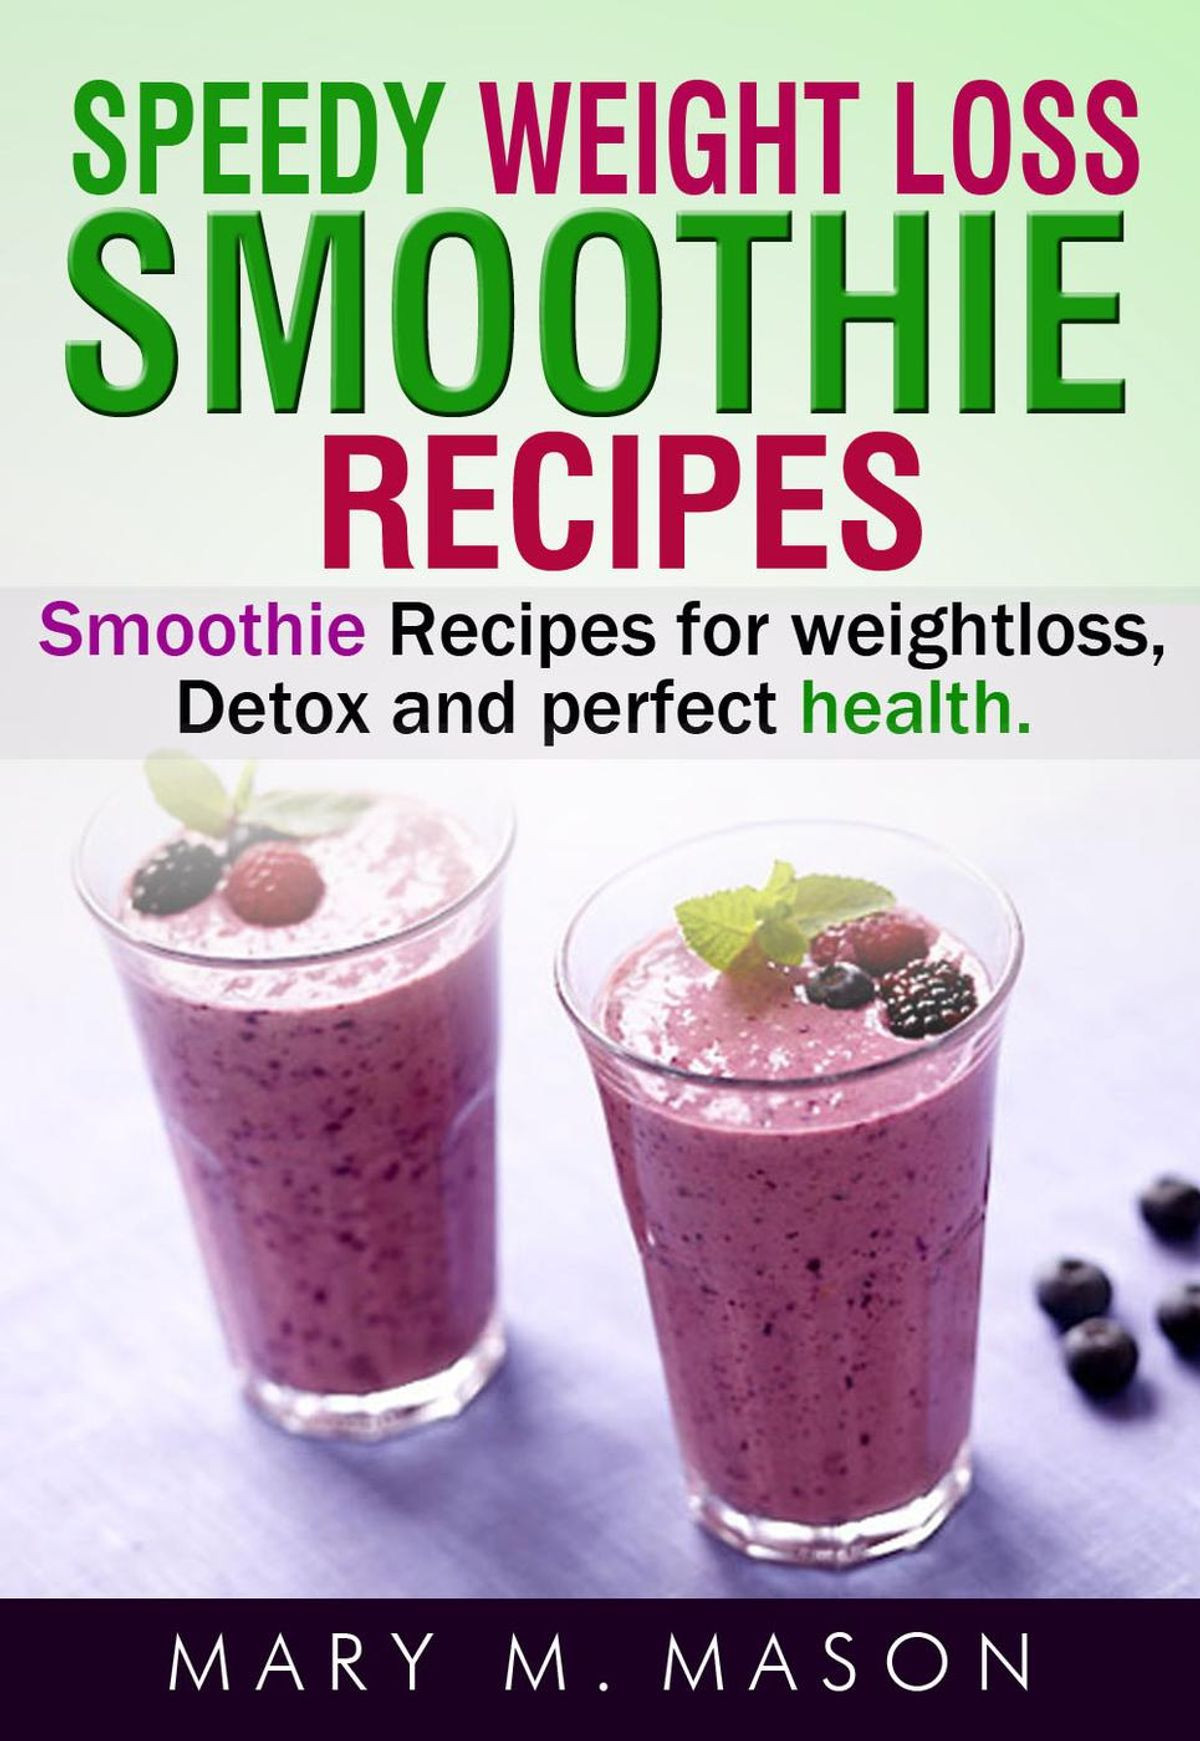 Loss Weight Smoothie Recipes
 Speedy Weight Loss Smoothie Recipes Smoothie Recipes for